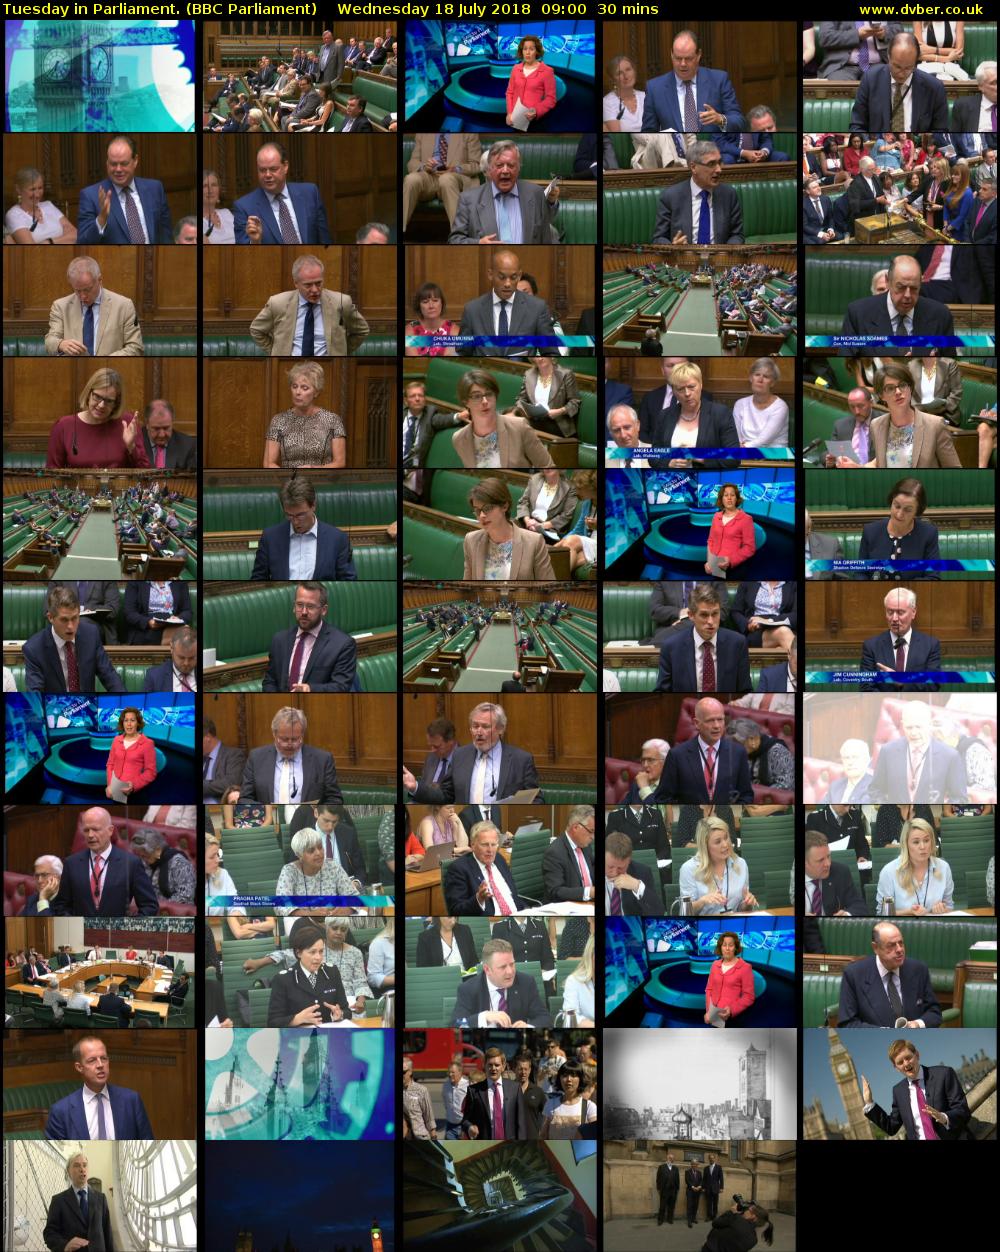 Tuesday in Parliament. (BBC Parliament) Wednesday 18 July 2018 09:00 - 09:30